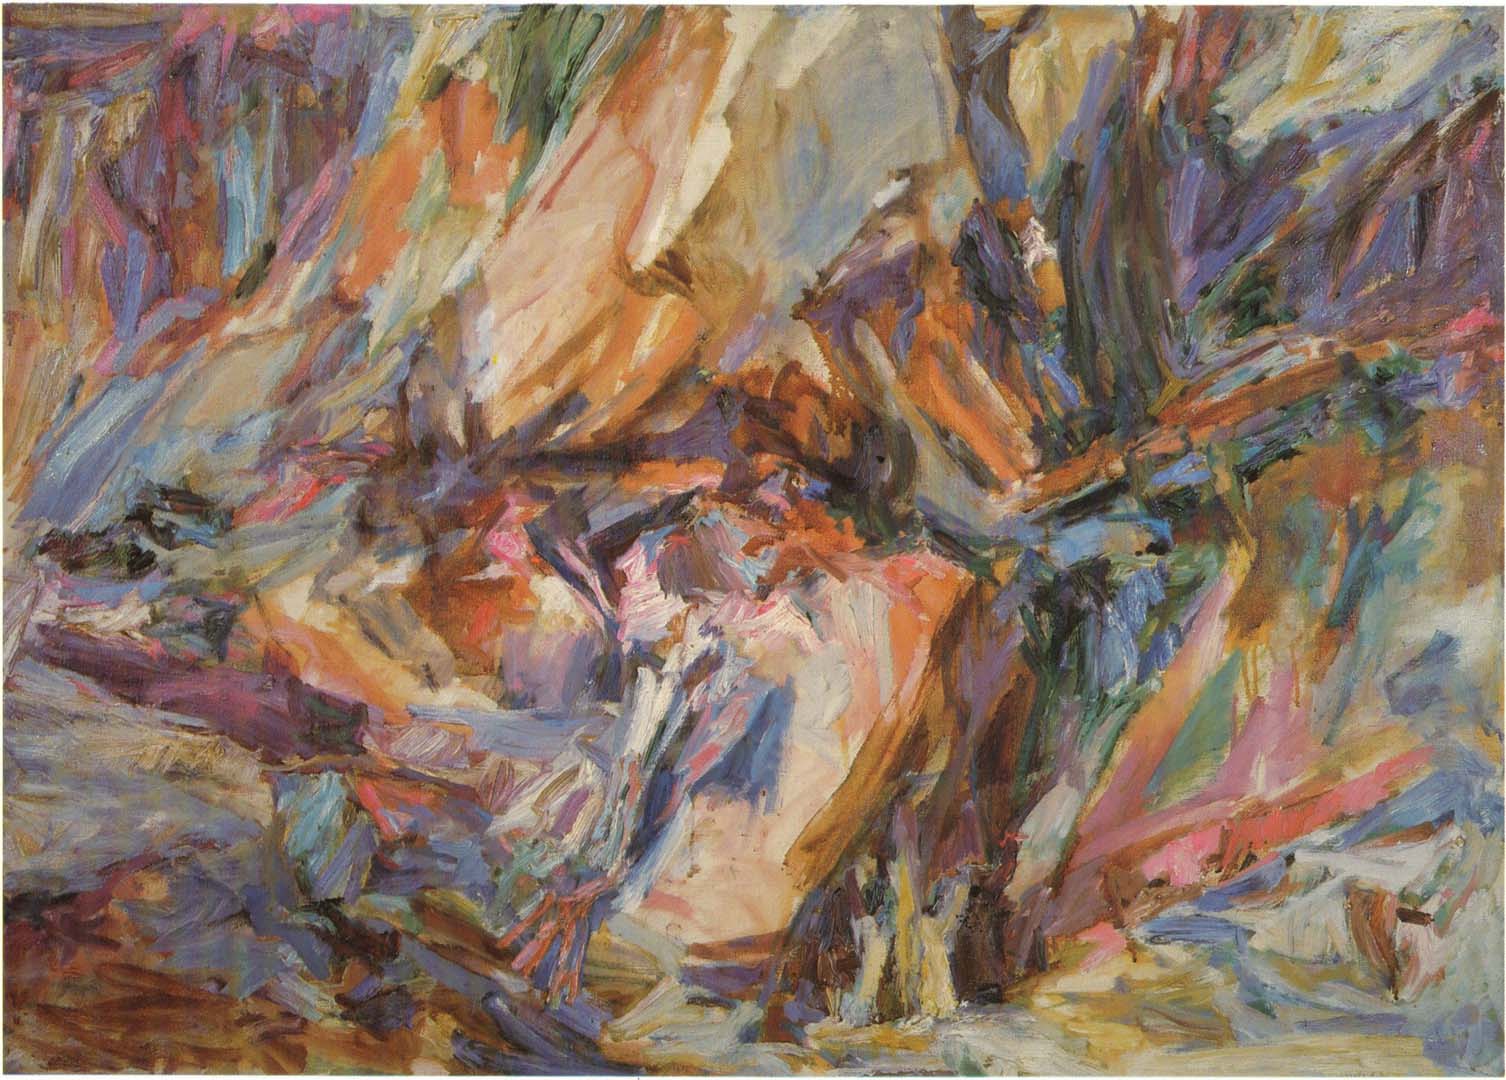 1955 Fractured Rock Oil on Canvas 36 x 50